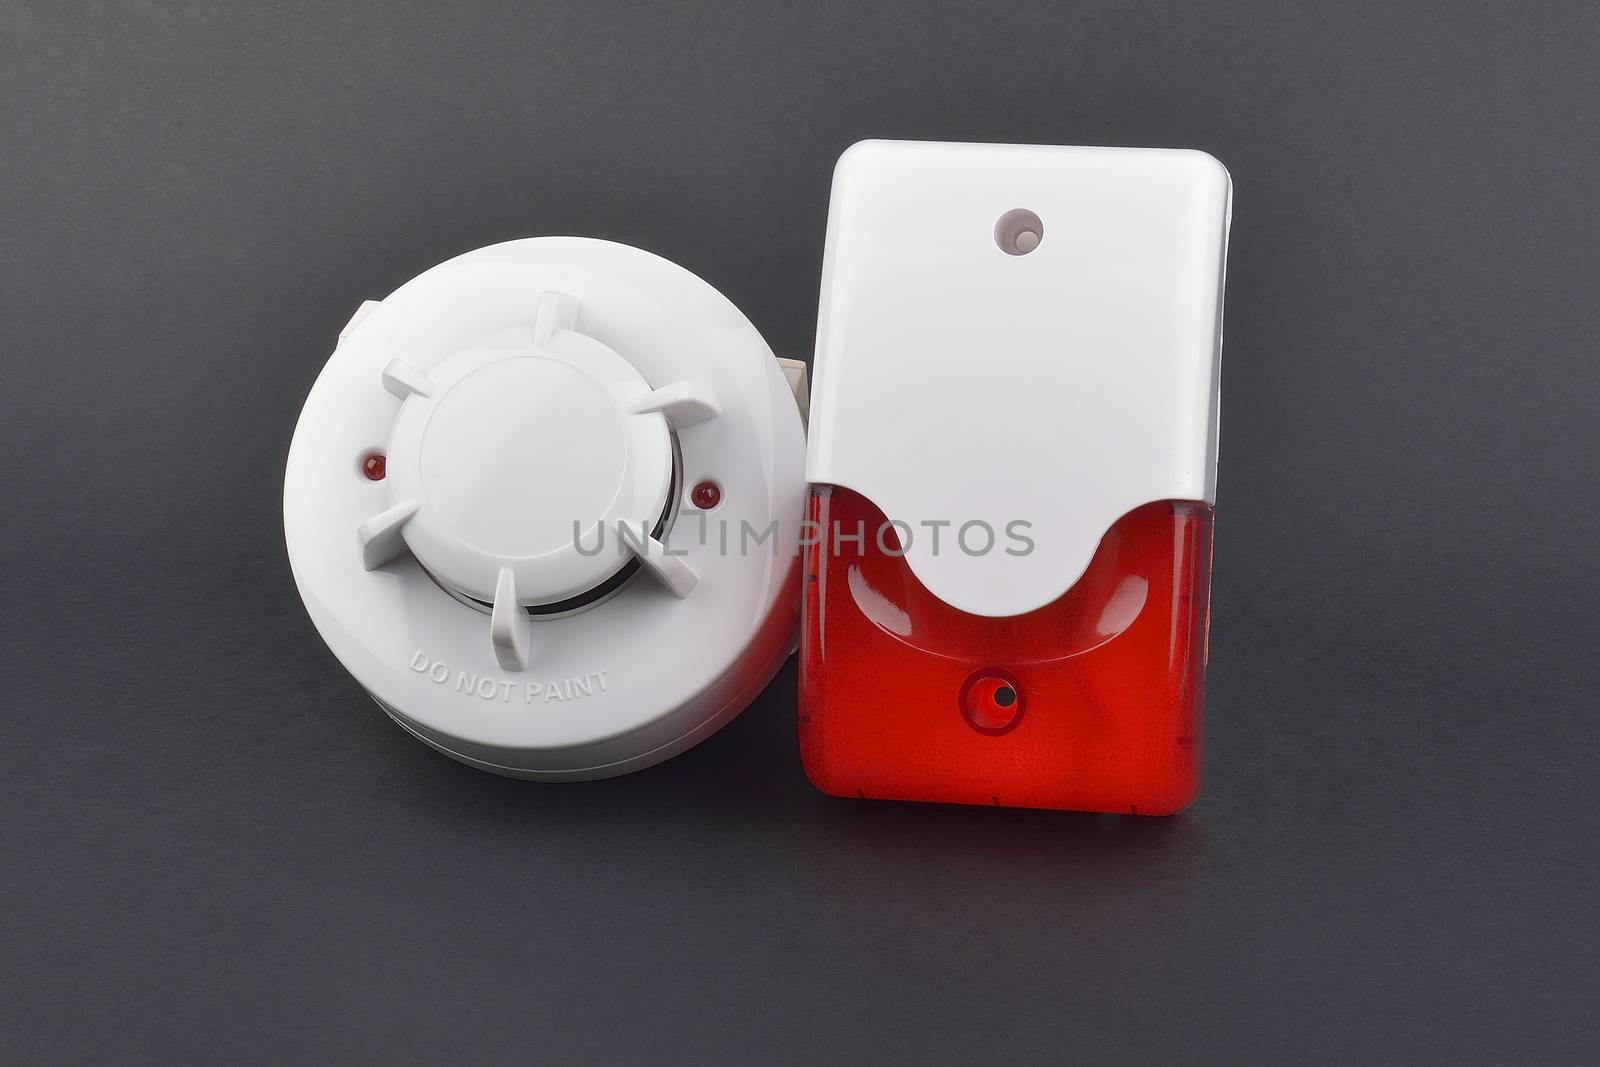 security alarm systems. Industrial or house alarm by constantinhurghea